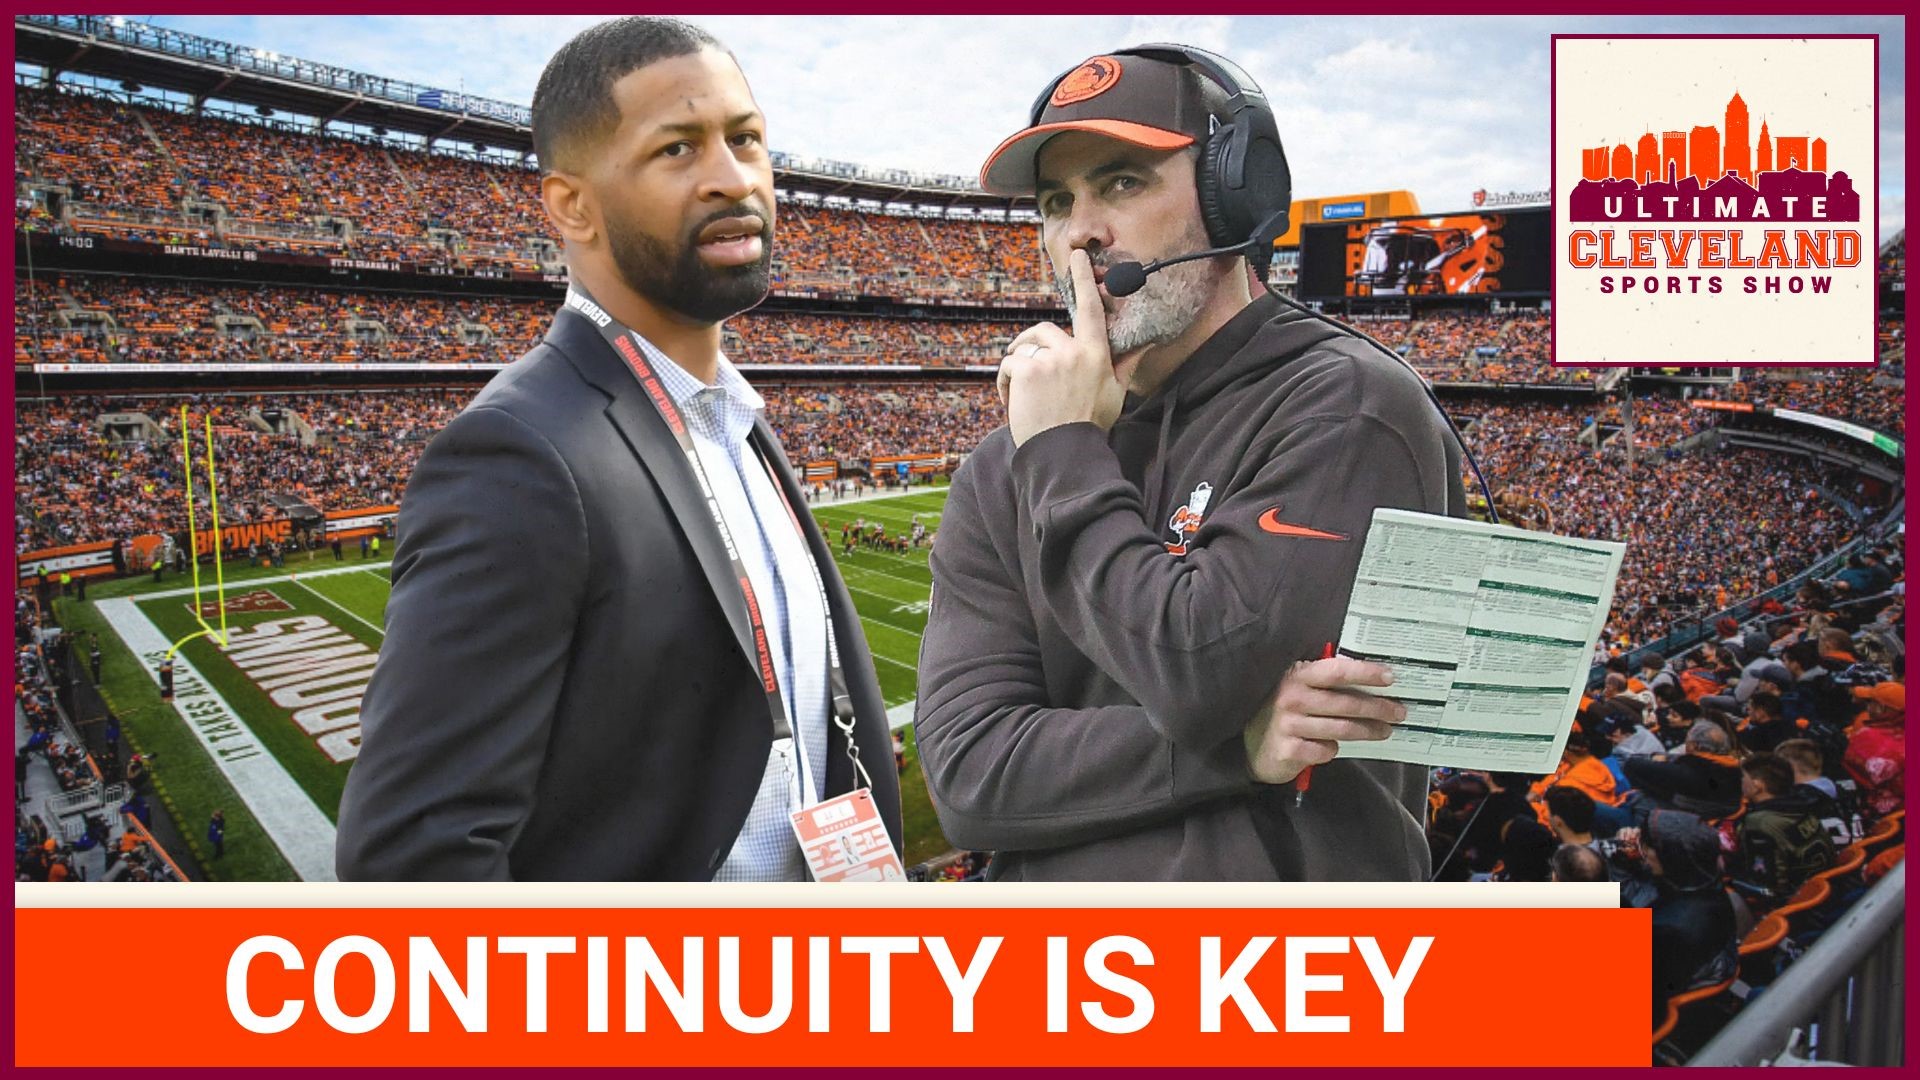 The Cleveland Browns ownership made a statement that Kevin Stefanski & Andrew Berry have extensions coming. As we wait for final deals to come ...